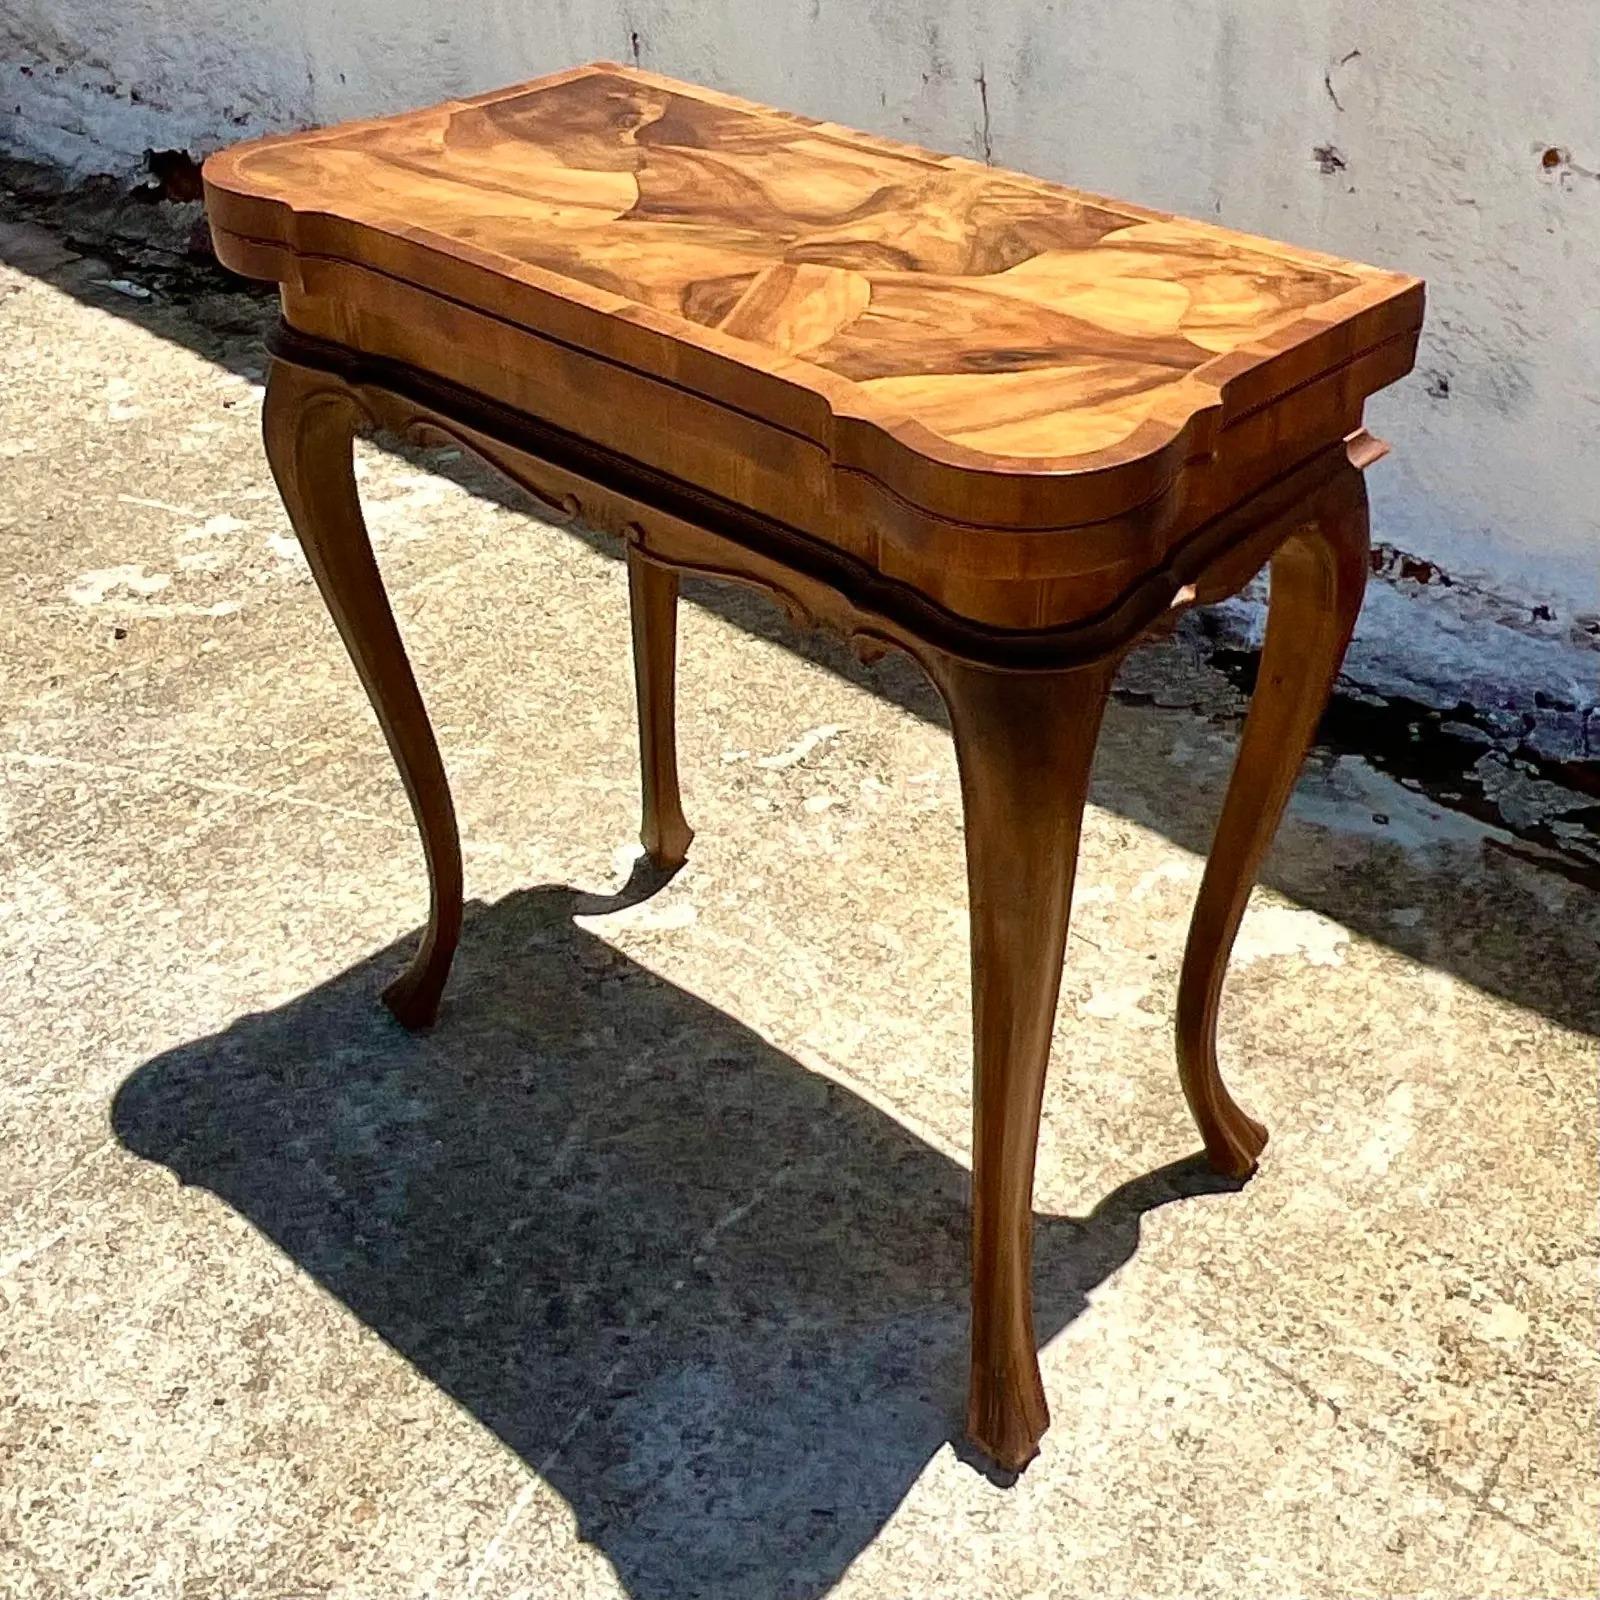 A fantastic vintage patchwork Burl wood card table. A chic flip top design that opens up and turns to reveal a stunning table top. Perfect for last minute seating for large parties or a charming card game. Even a puzzle table! So many uses. You can